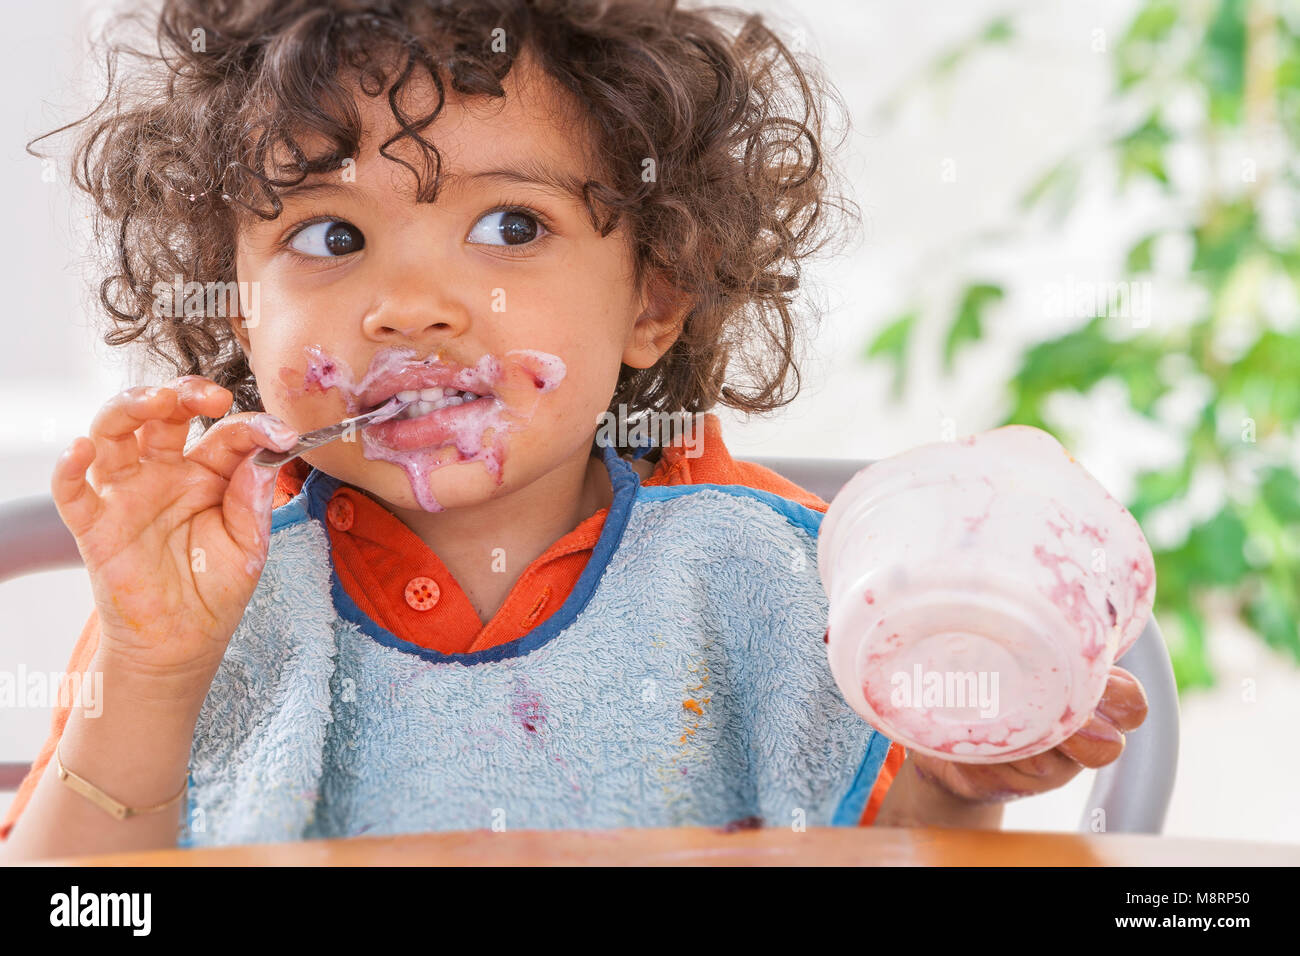 Toddler sitting in highchair and eating greek yogurt. Baby learning to eat and has yogurt on face. Stock Photo